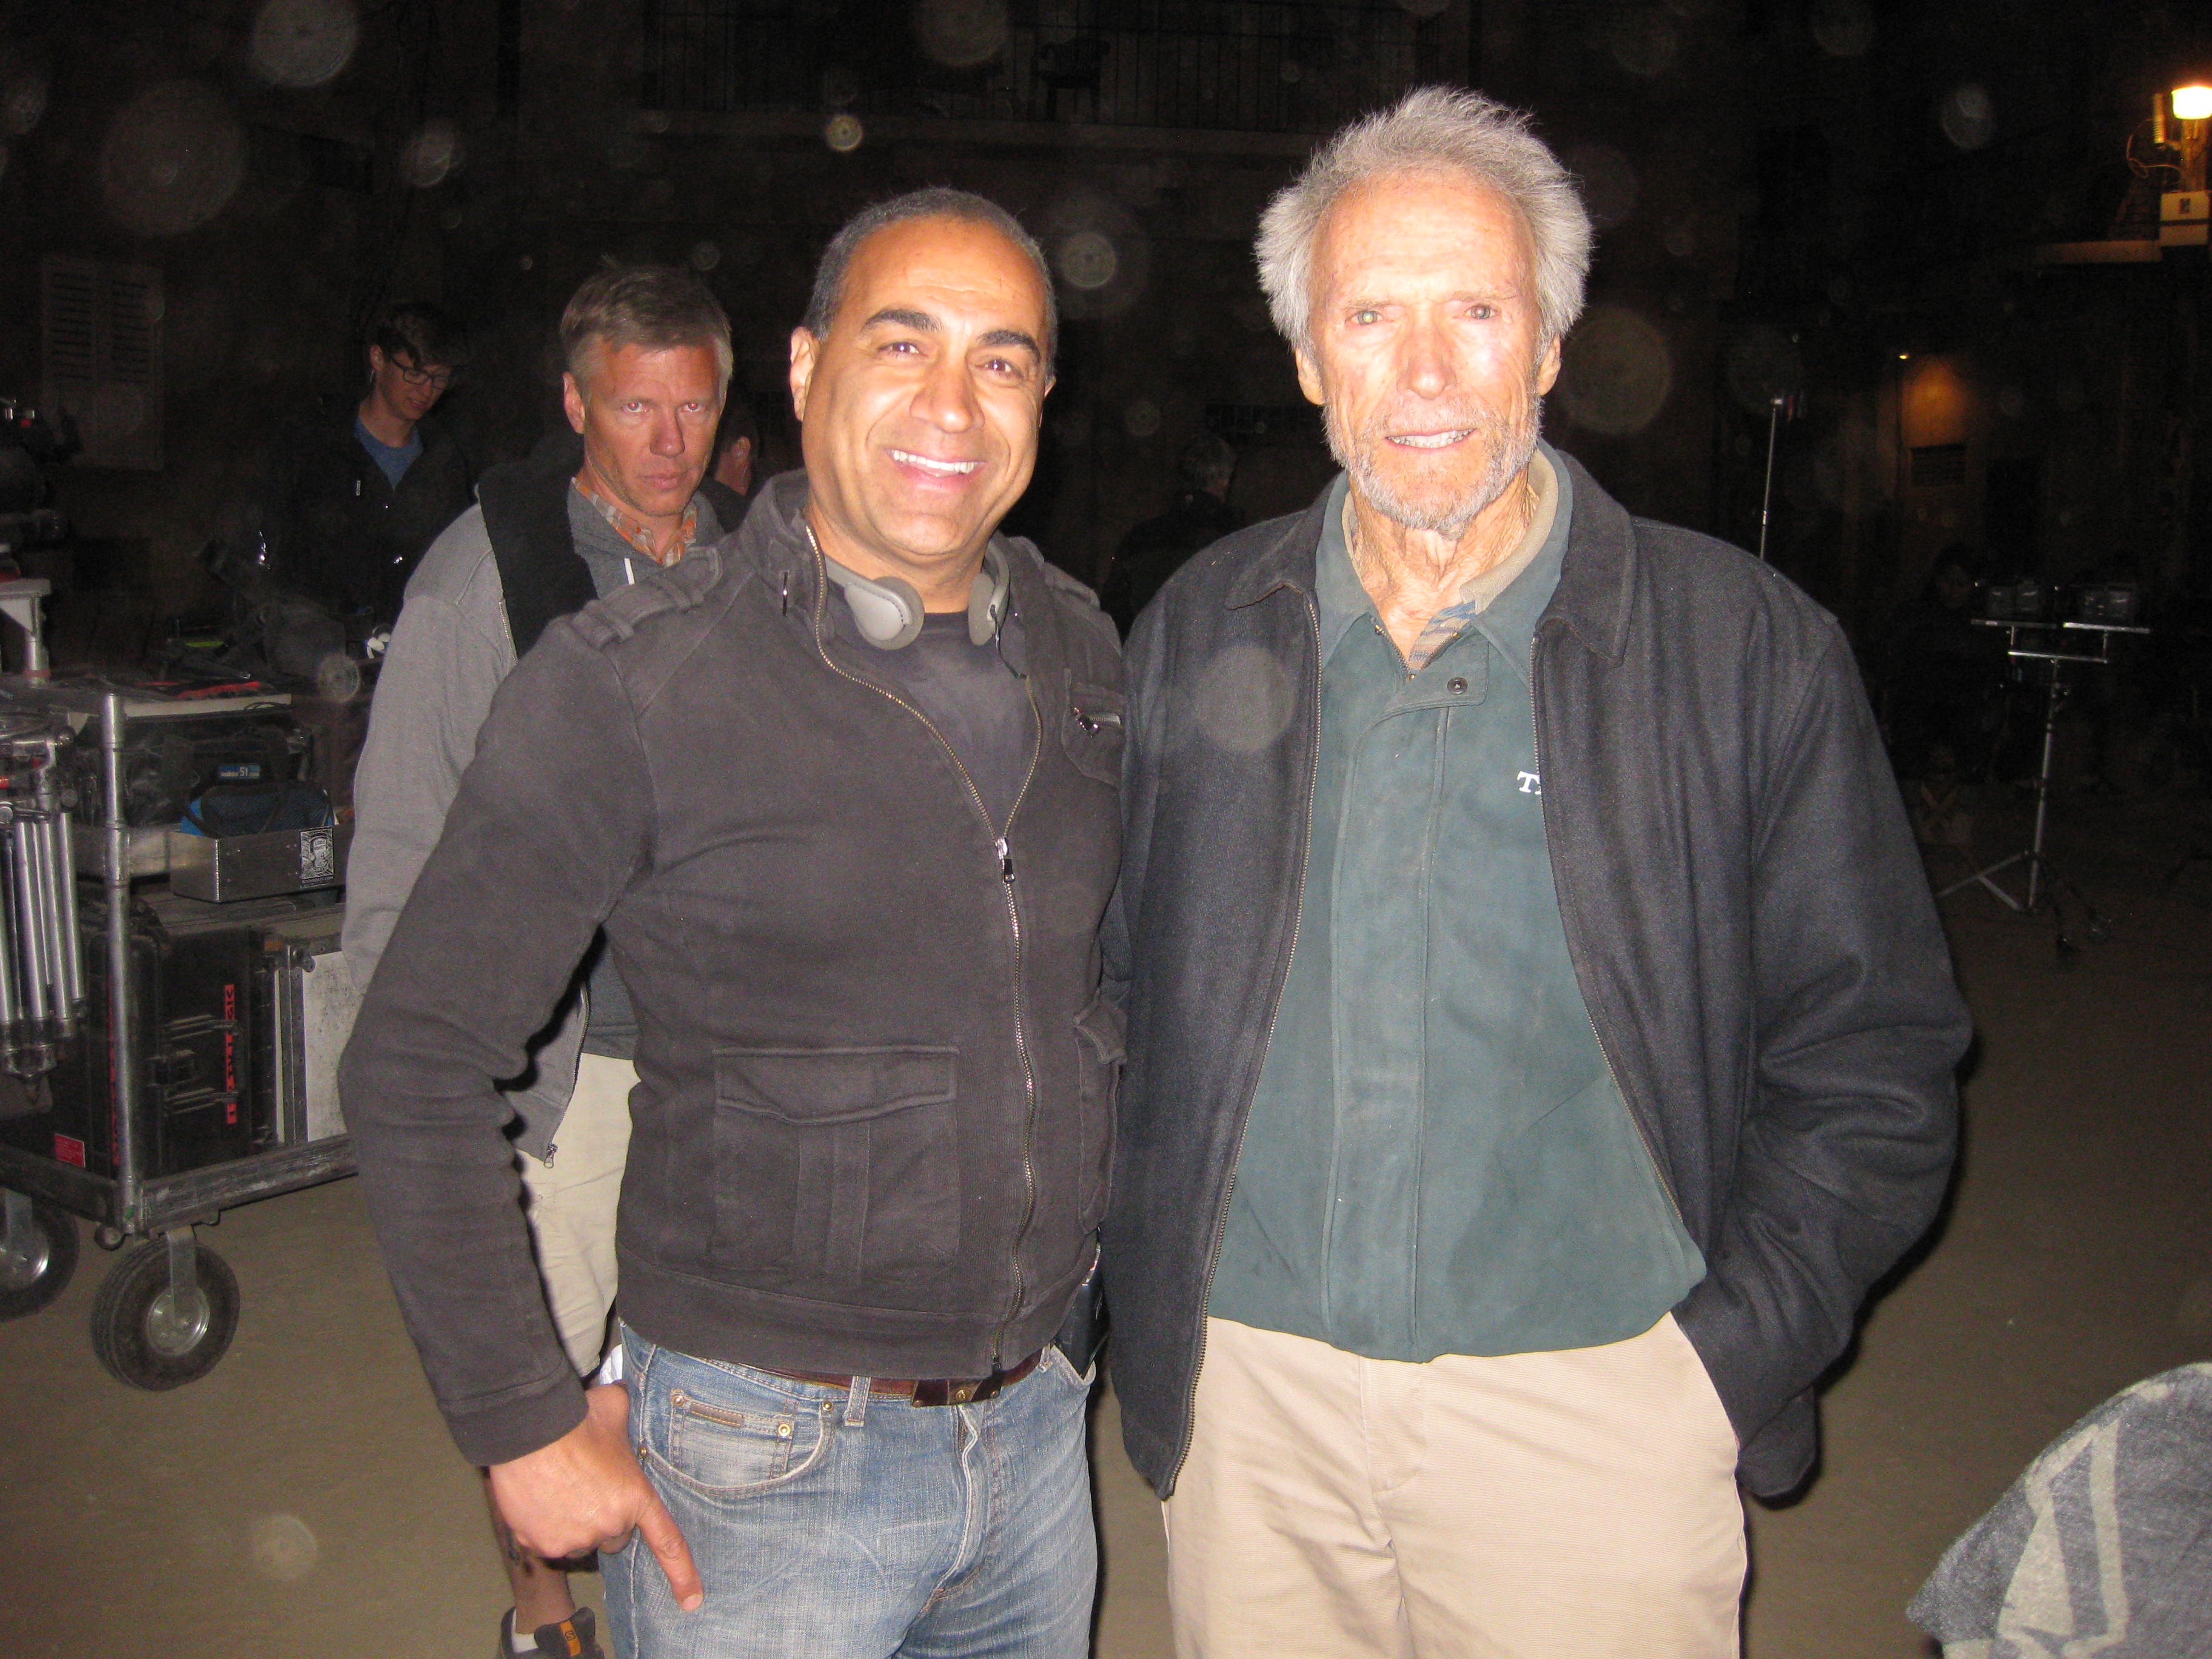 me and the Director(Clint Eastwood)for the movie called(American sniper)and I was Iraqi Advise and Actor in that movie